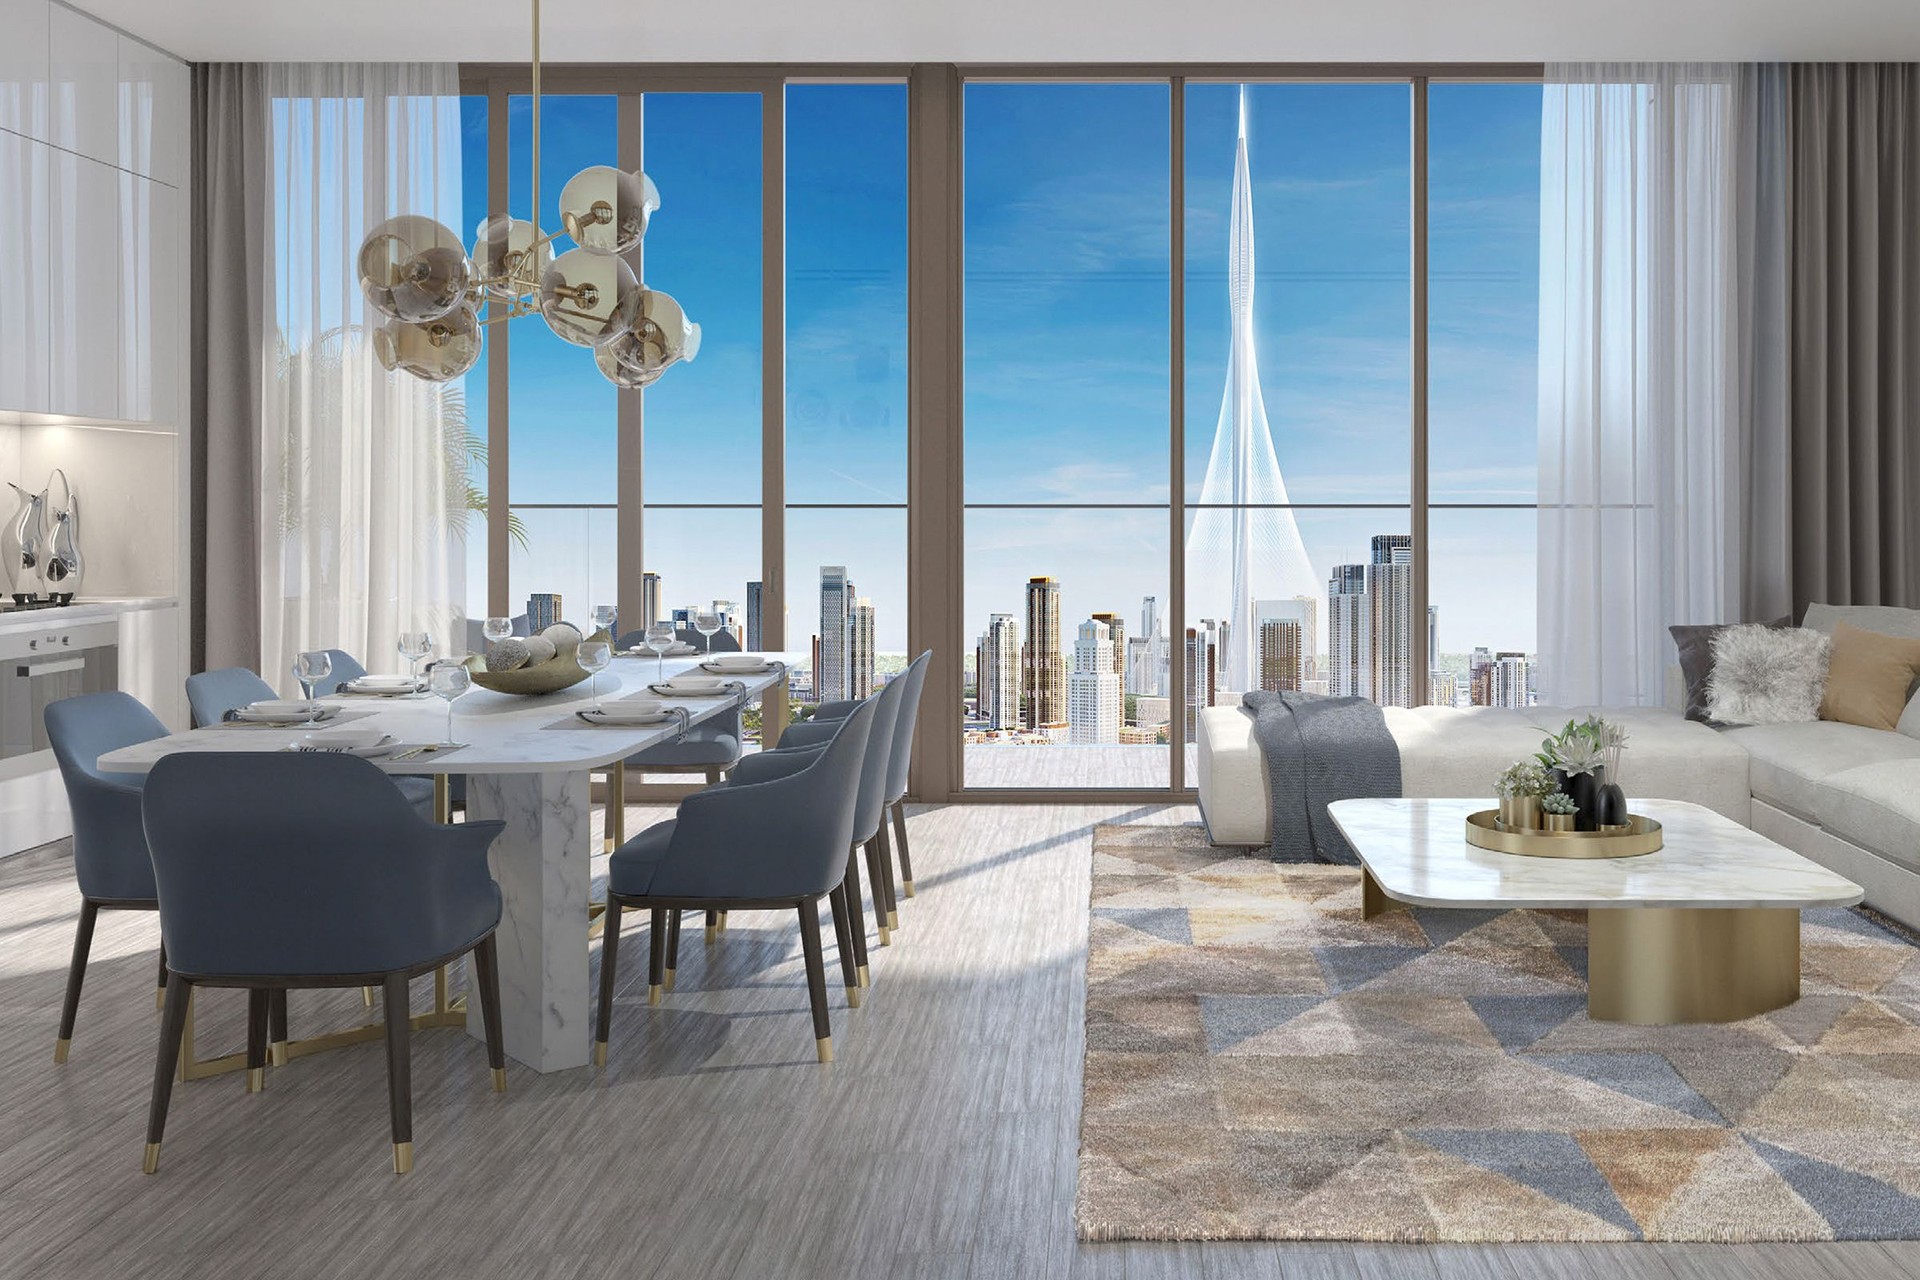 Luxury off plan apartment in serviced Dubai Creek Harbour residence: Image 1